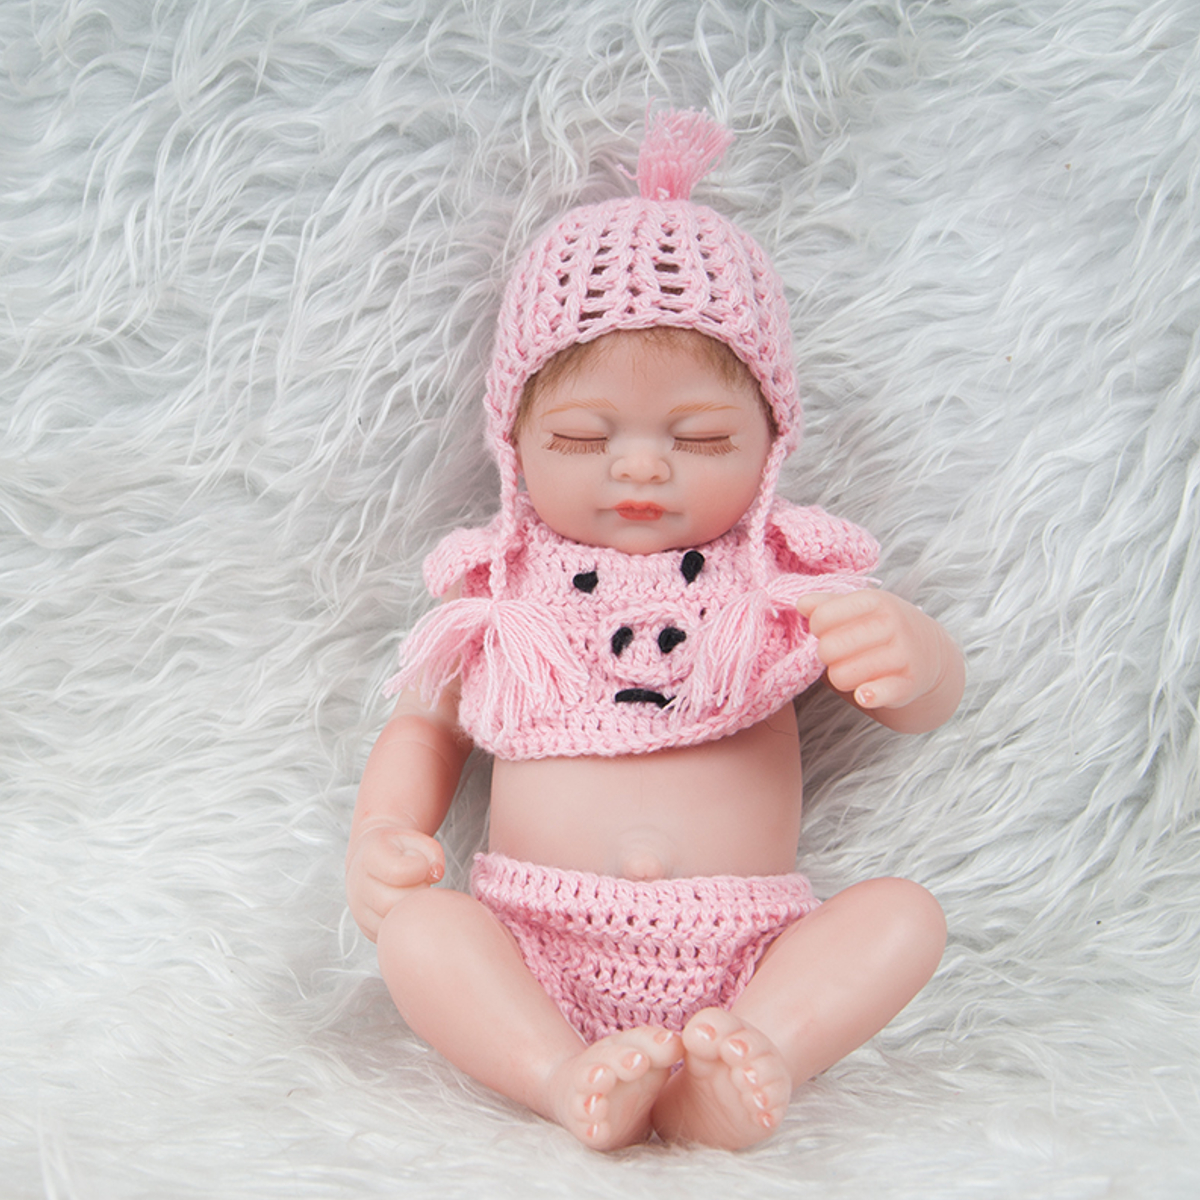 28CM-Soft-Silicone-Vinyl-Realistic-Sleeping-Reborn-Lifelike-Newborn-Baby-Doll-Toy-with-Moveable-Head-1731373-3